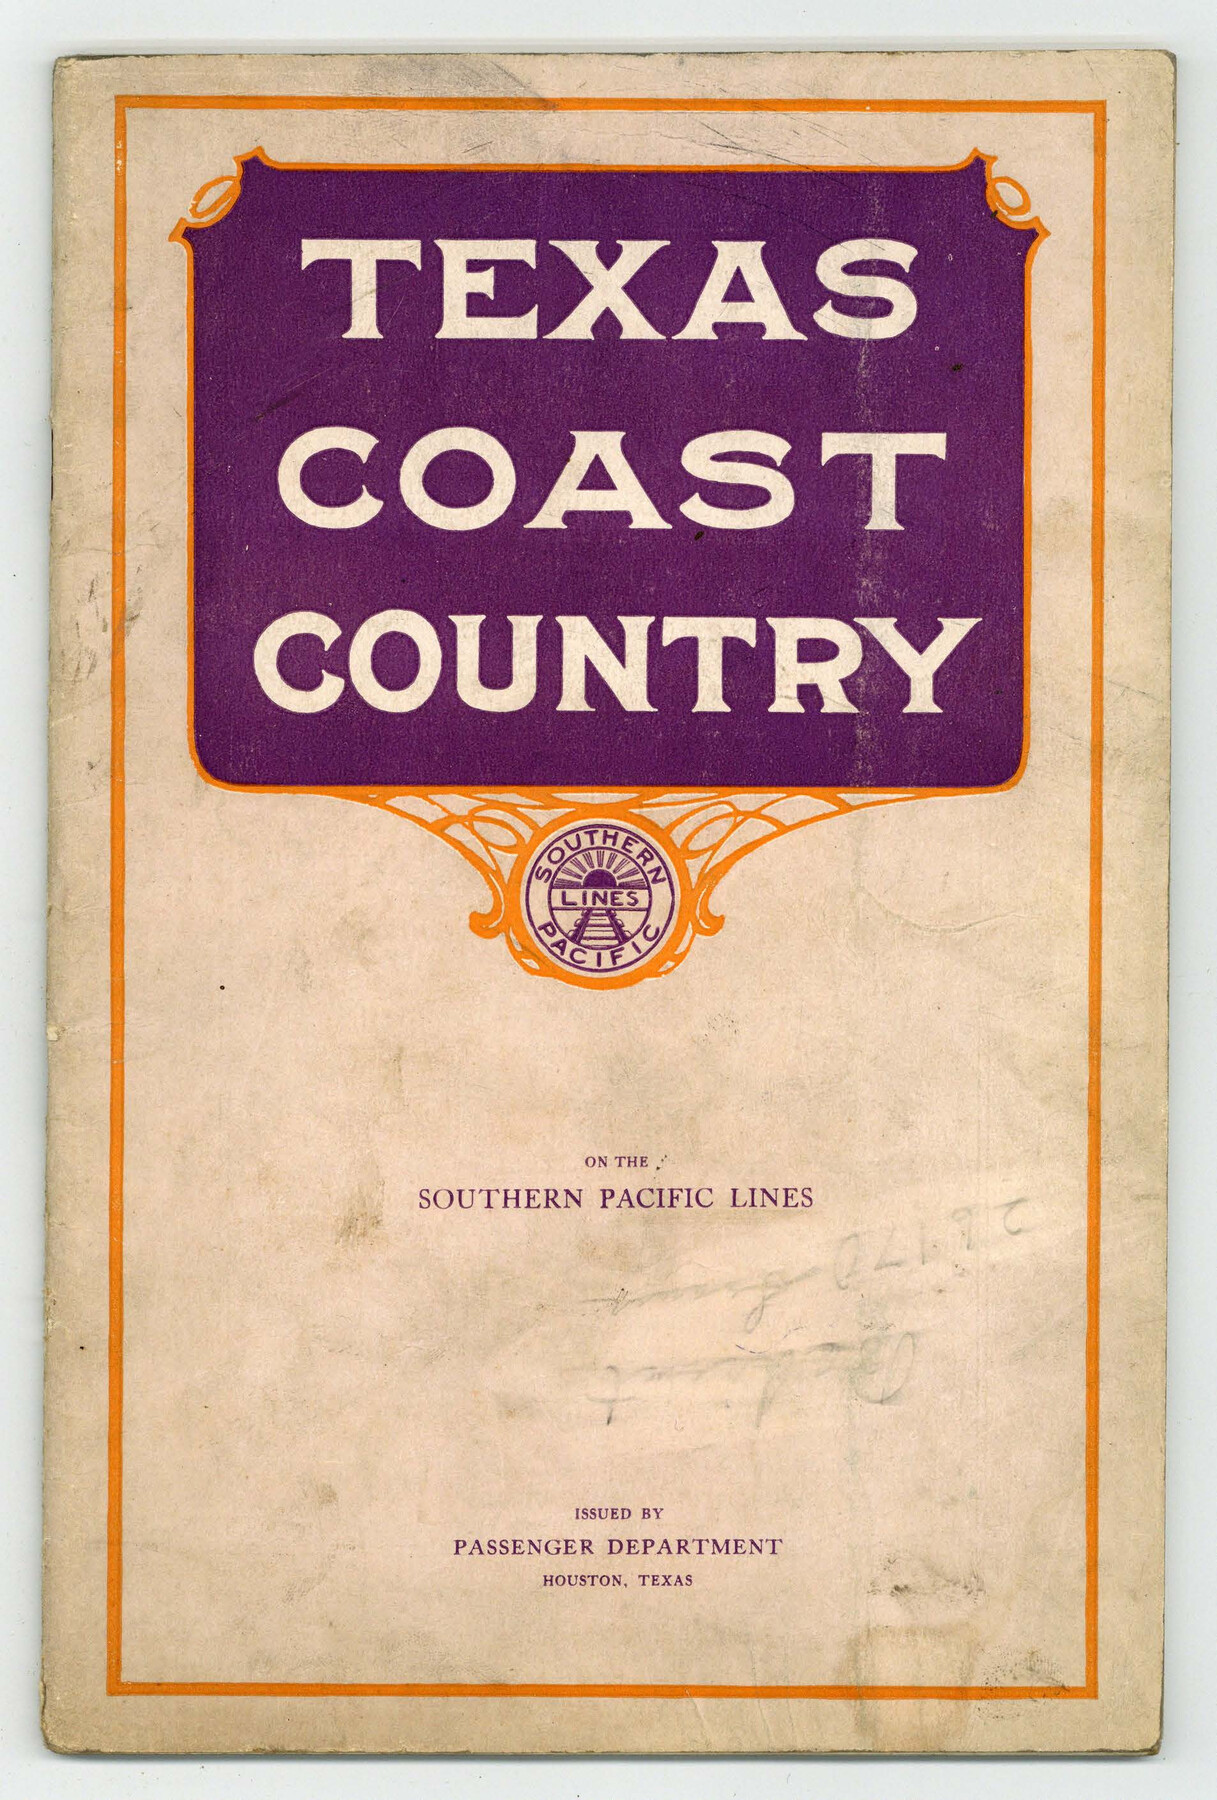 97061, Texas Coast Country on the Southern Pacific Lines